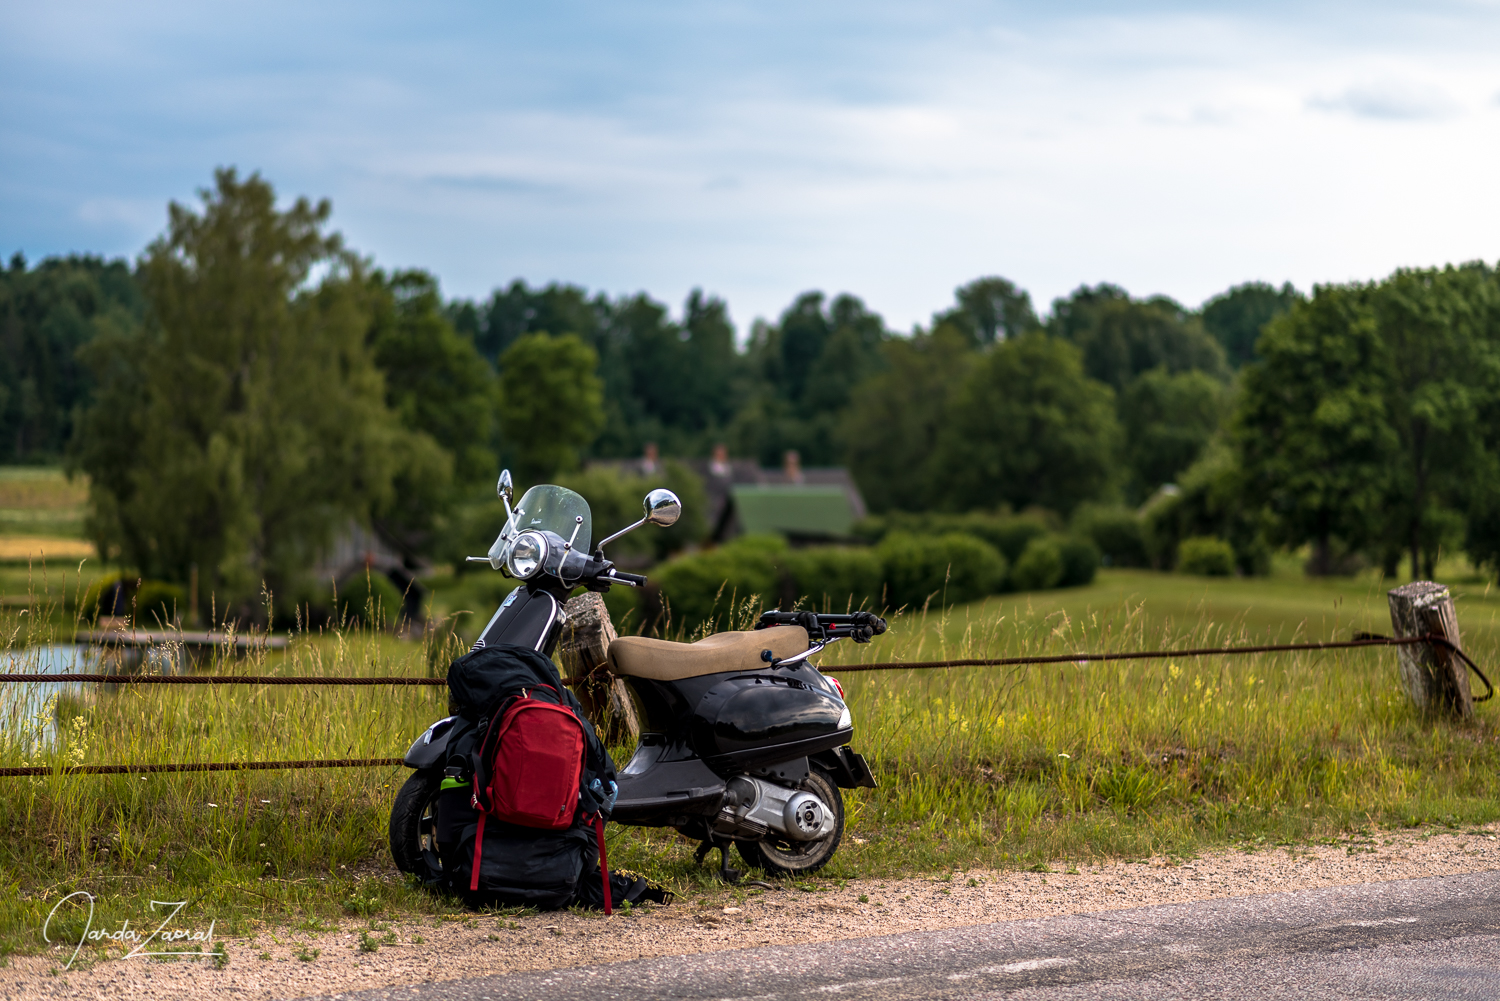 Scooter parked in the countryside of Latvia